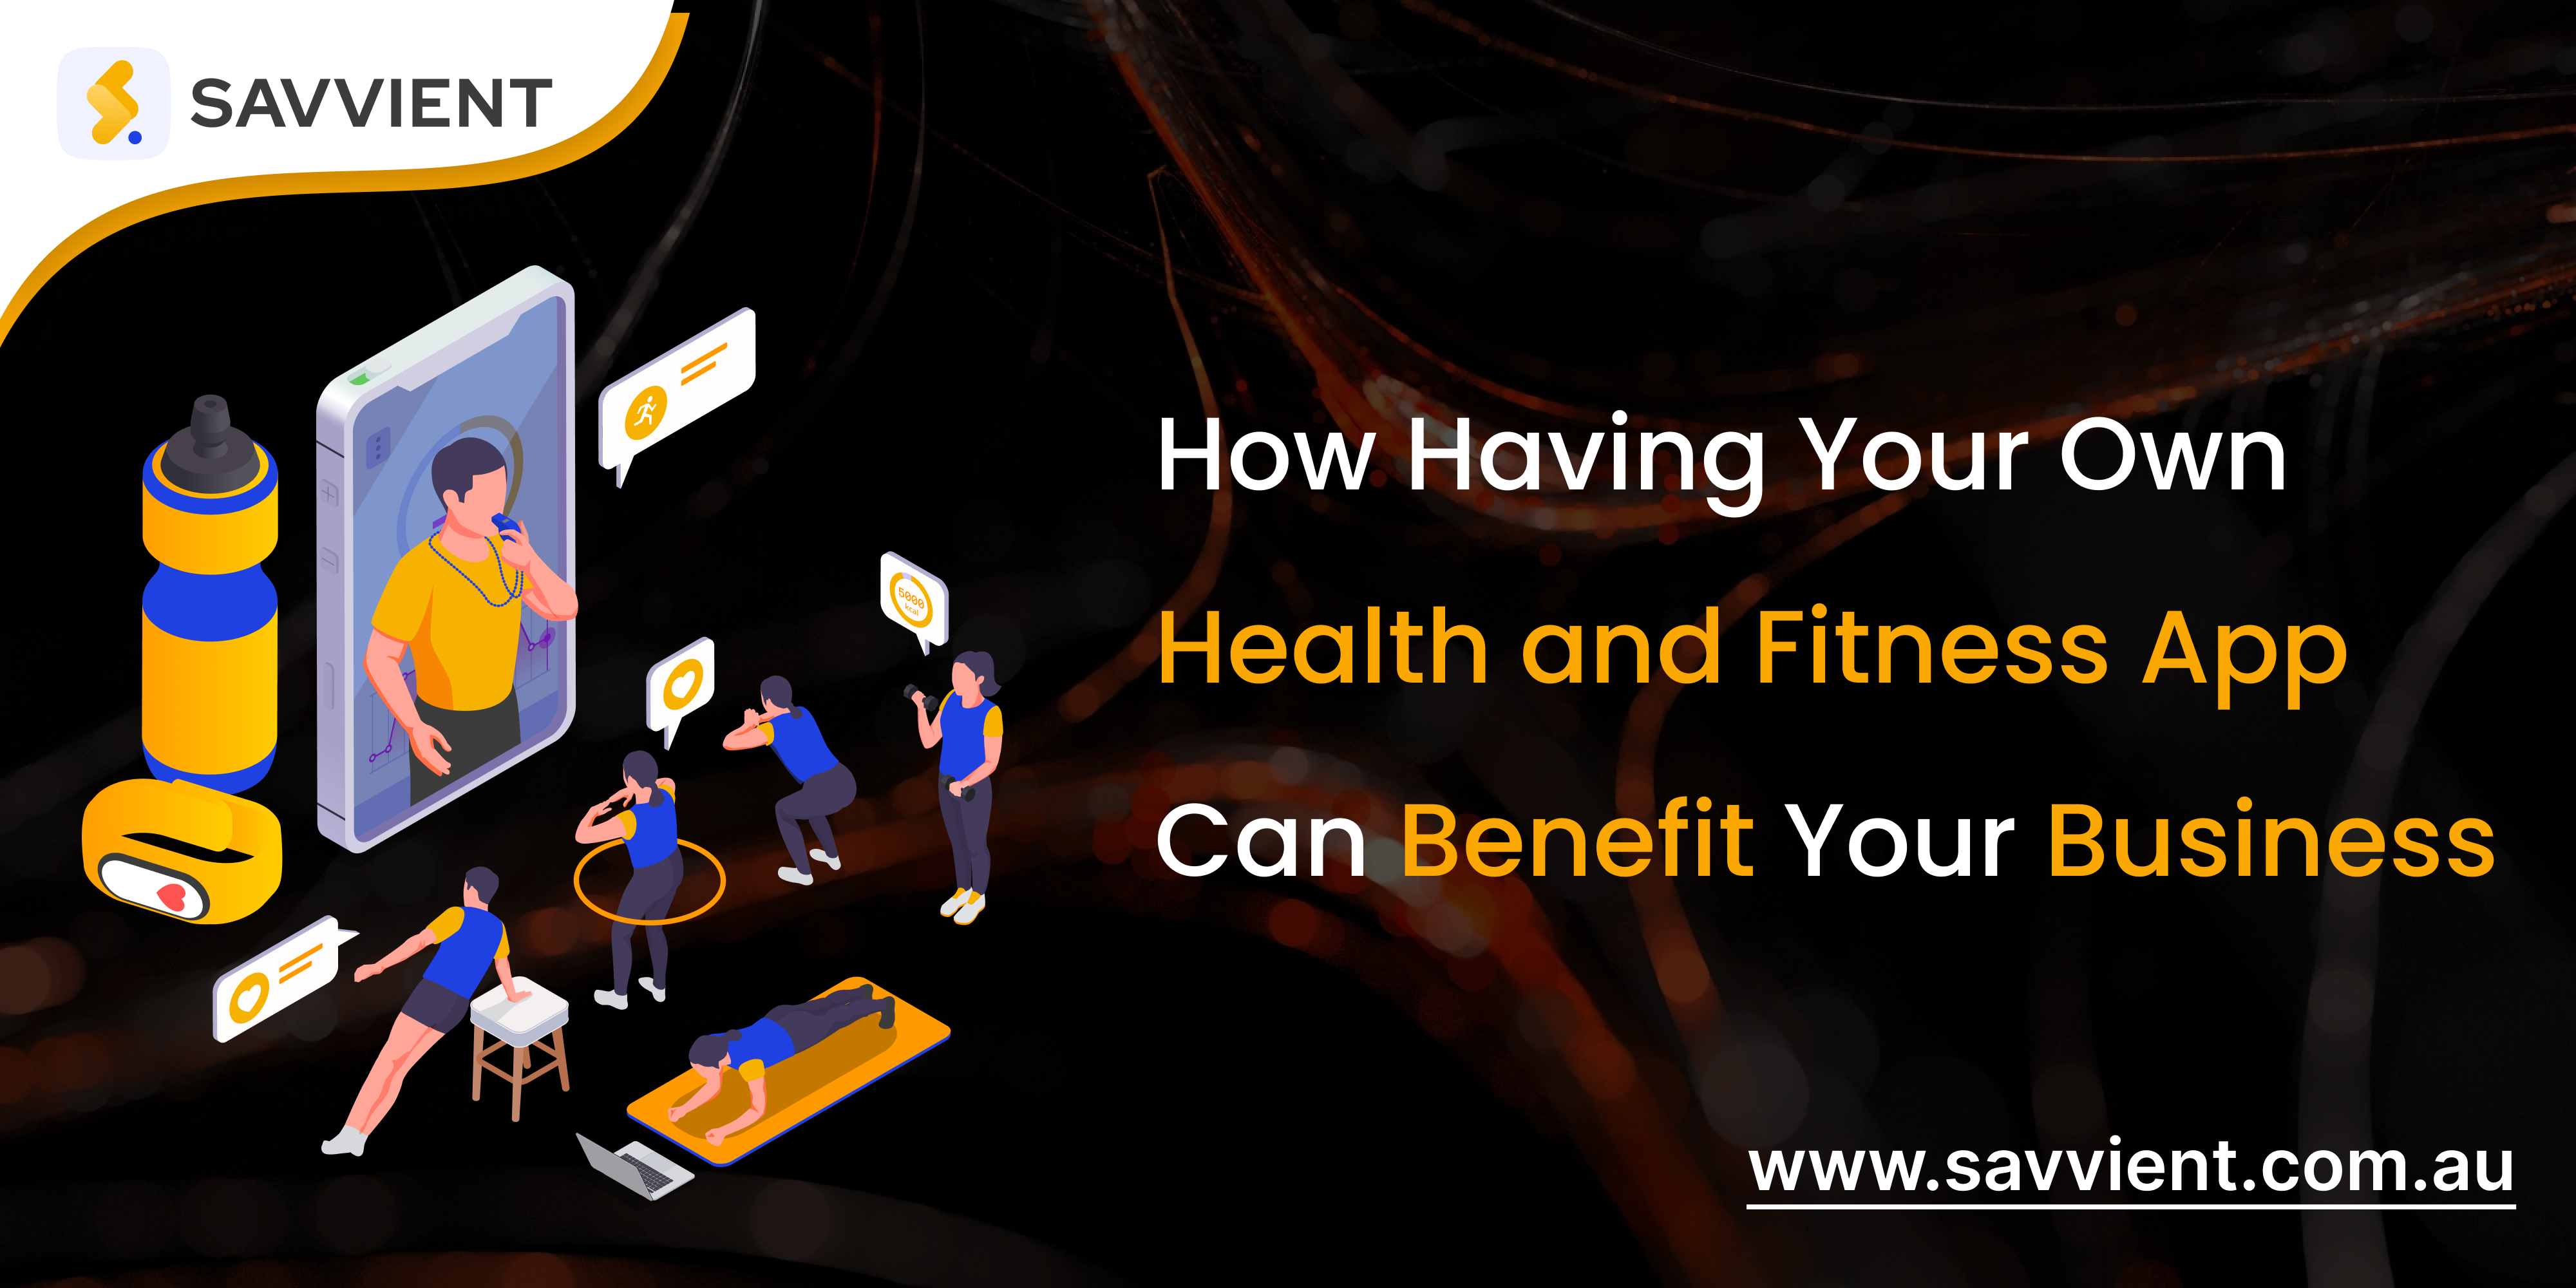 How Having Your Own Health and Fitness App Can Benefit Your Business